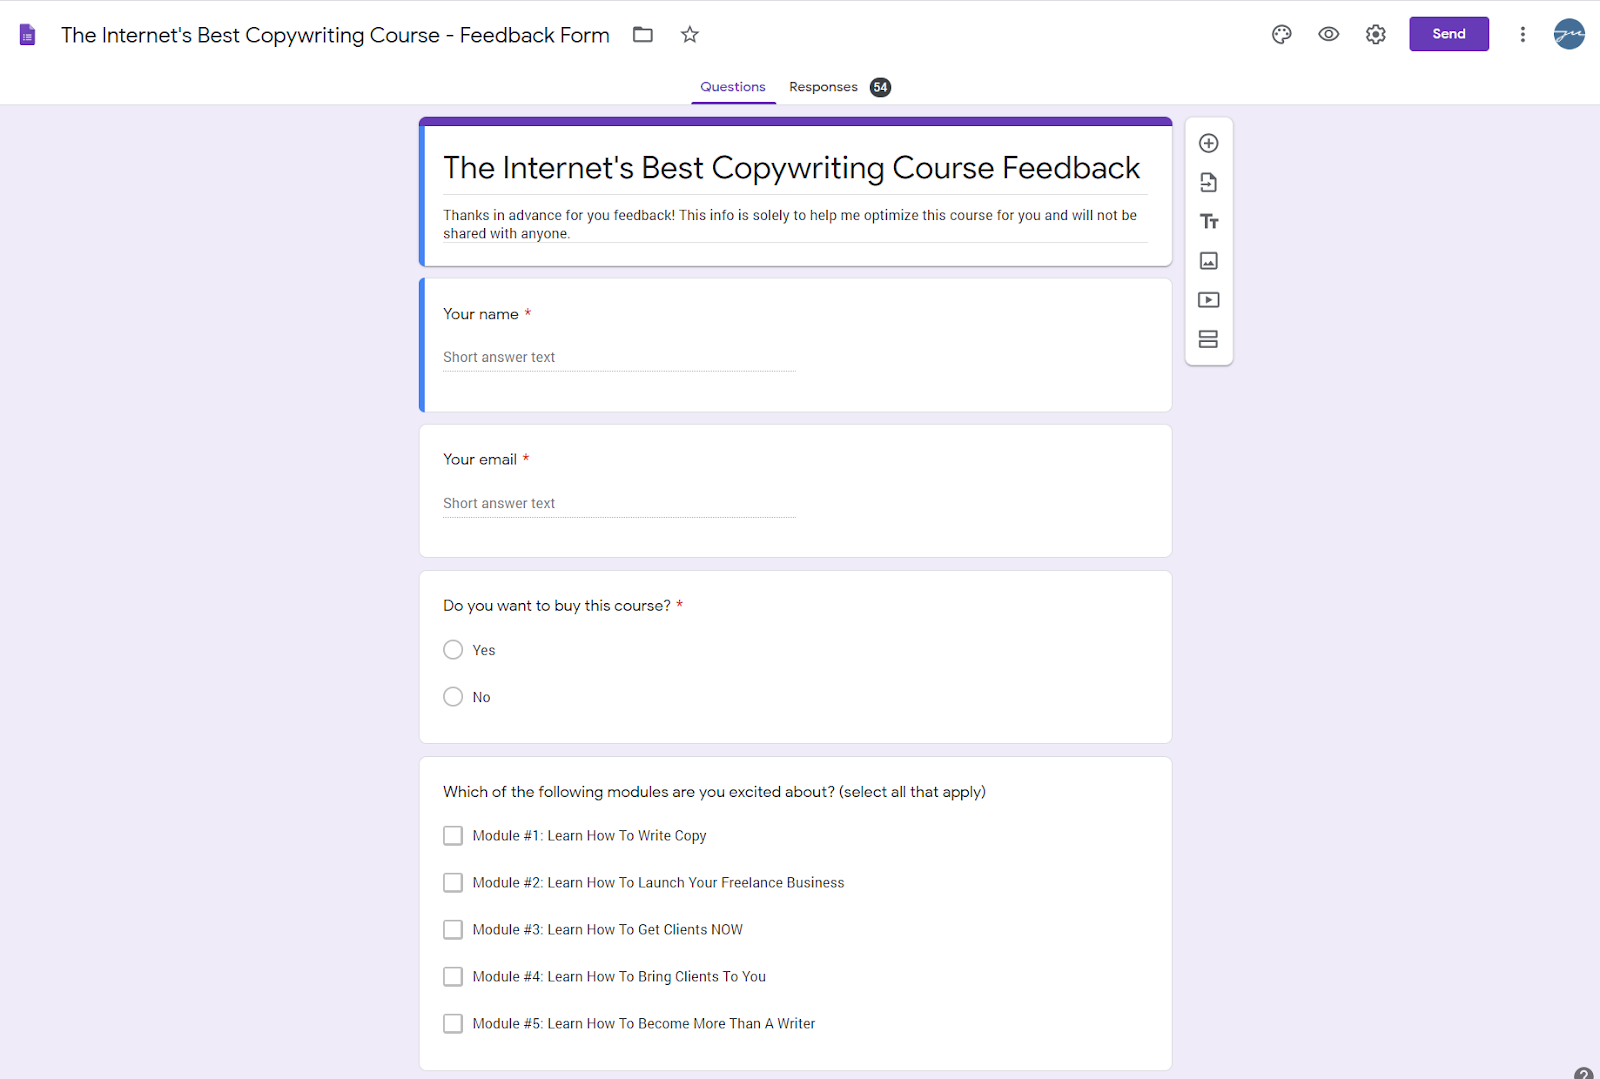 The Internet's Best Copywriting Course Feedback